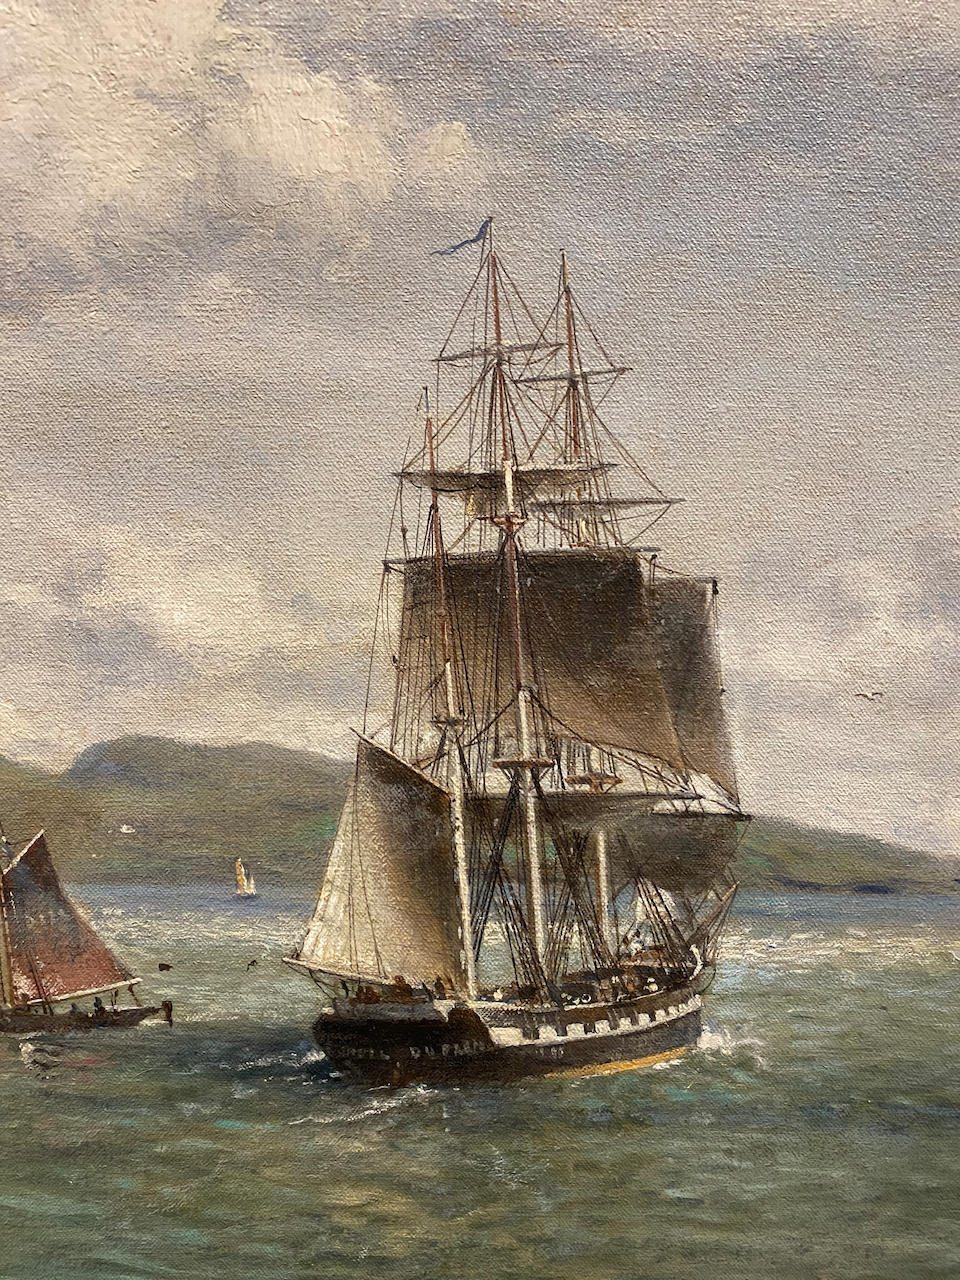 William Alexander Coulter (1849-1936) Three-Masted Barque Leaving Howth near Dublin, Ireland 24 x 36in framed 38 x 50in